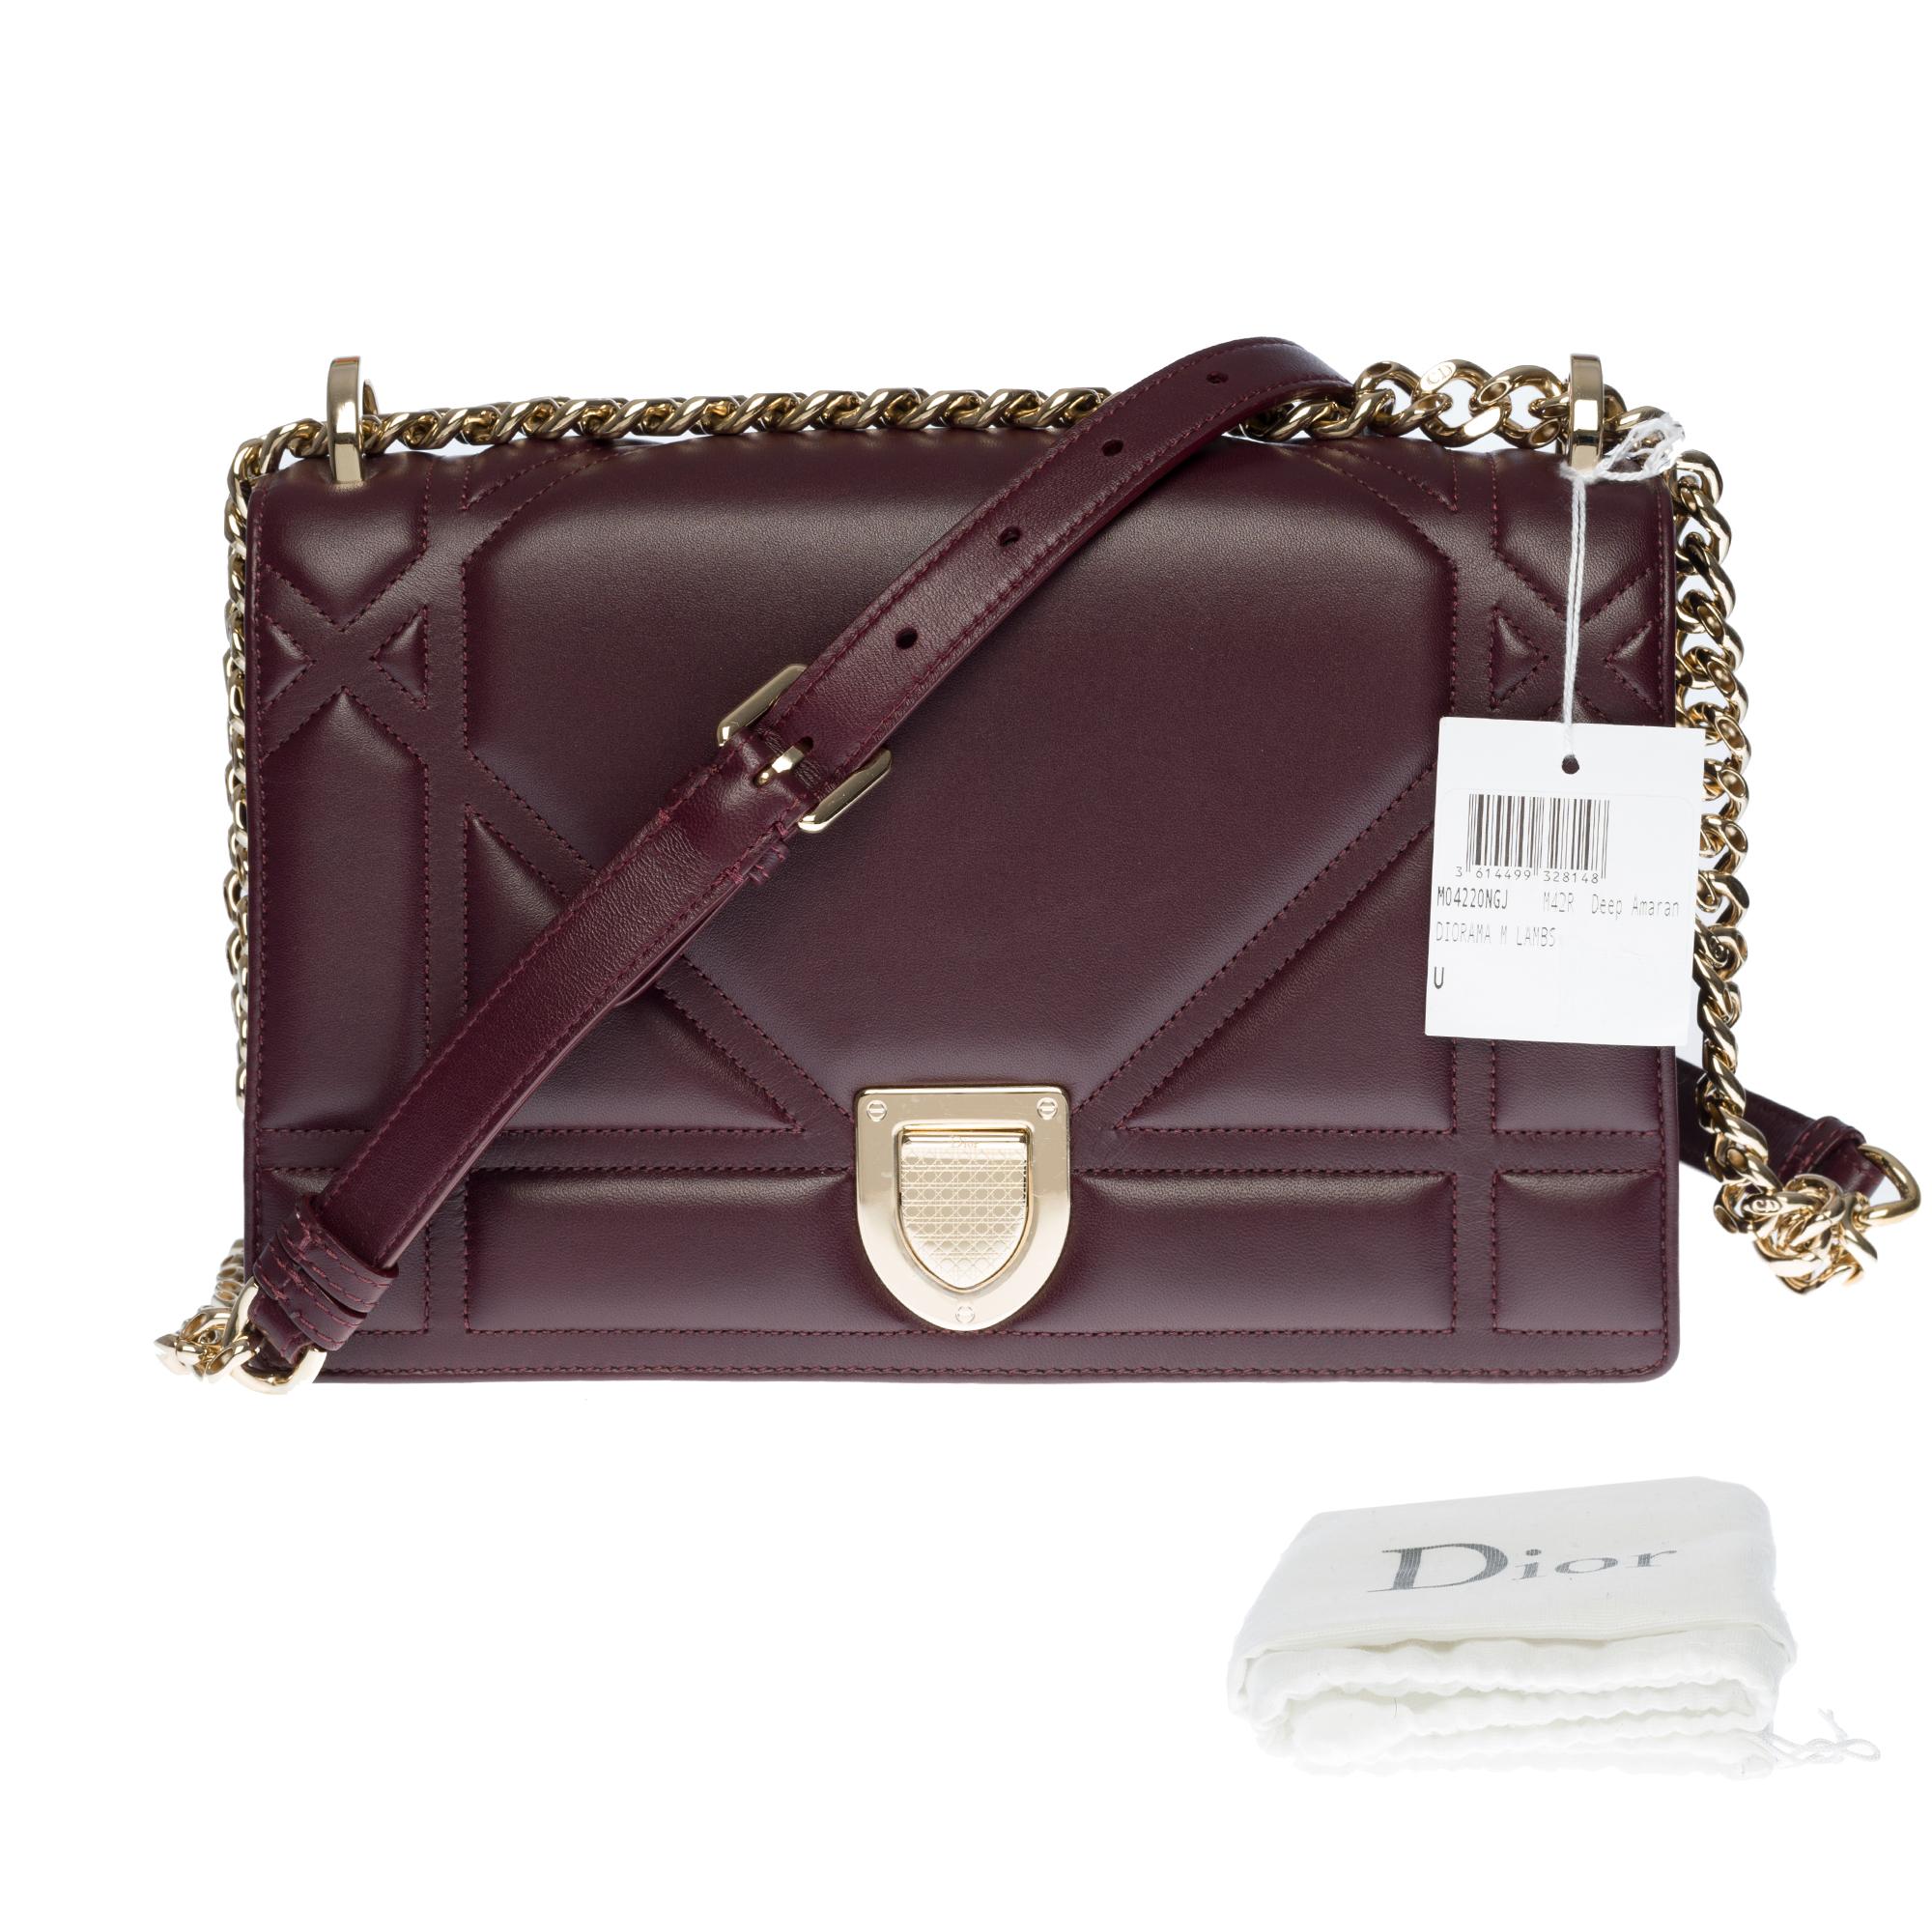 Brand New /Christian Dior Diorama Shoulder bag in Purple cannage leather, SHW 5